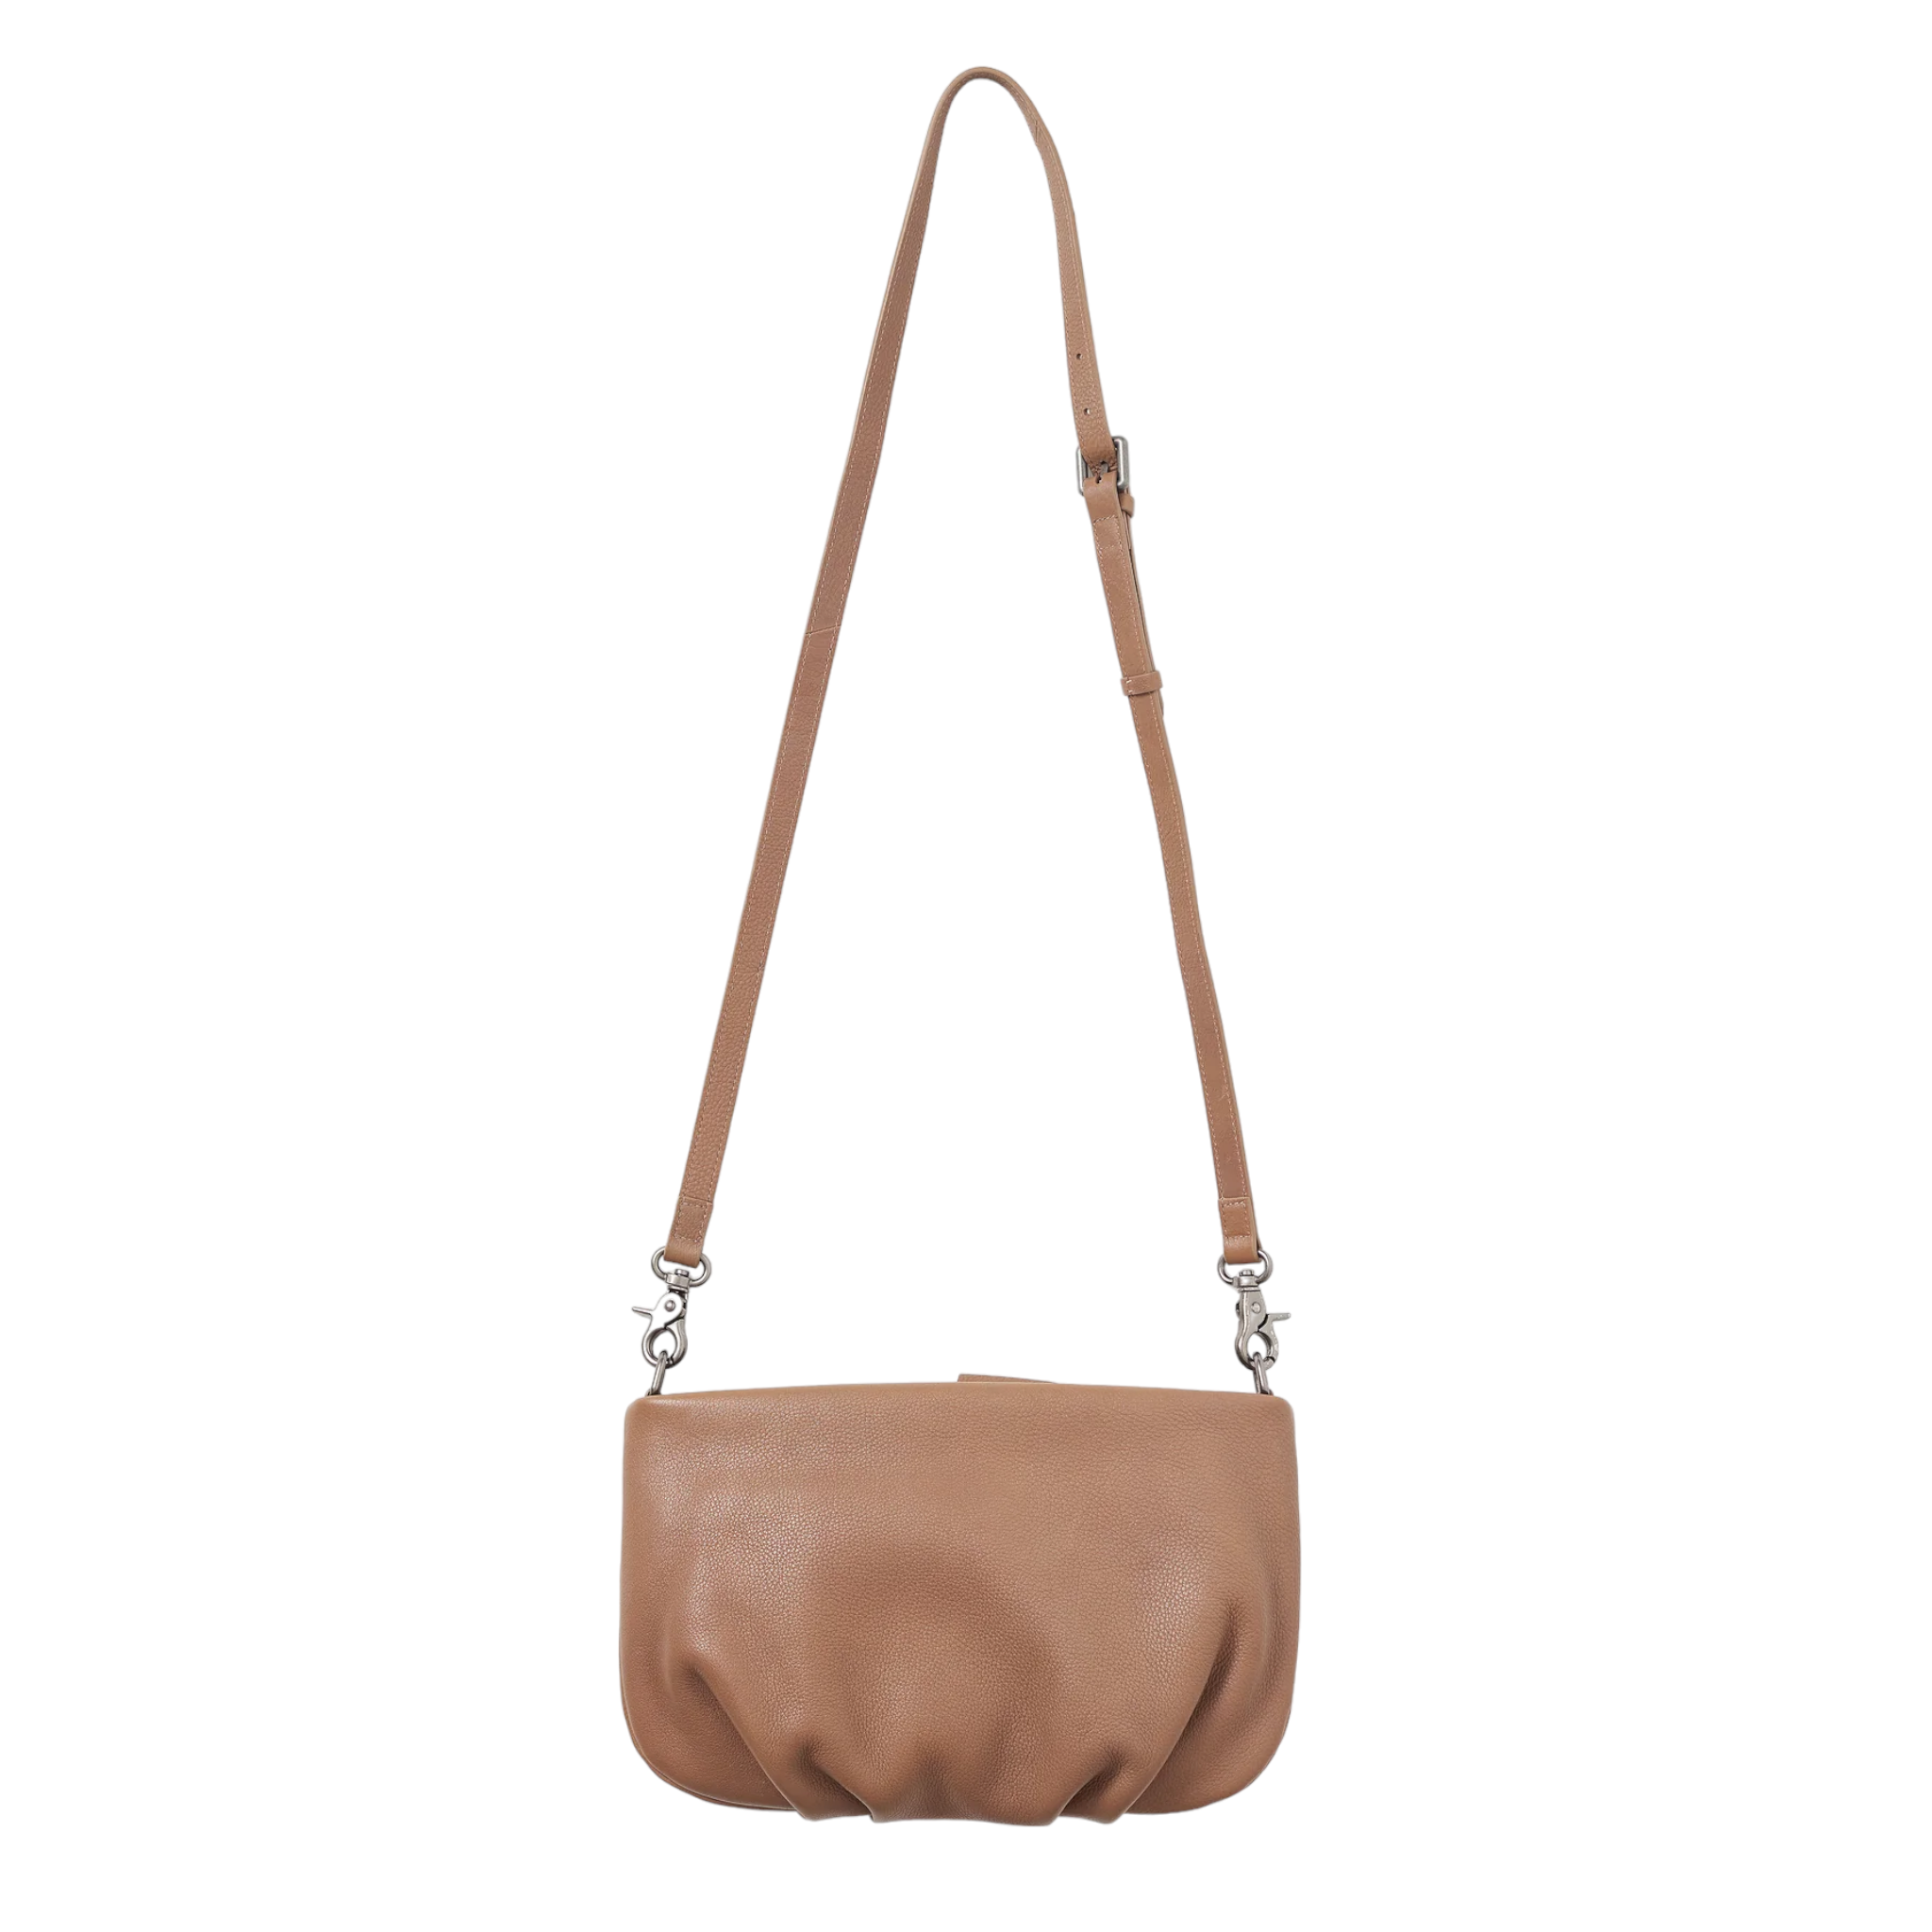 Shop Briarwood Sienna - with shoe&amp;me - from Briarwood - Bags - Handbag, Summer, Winter, Womens - [collection]